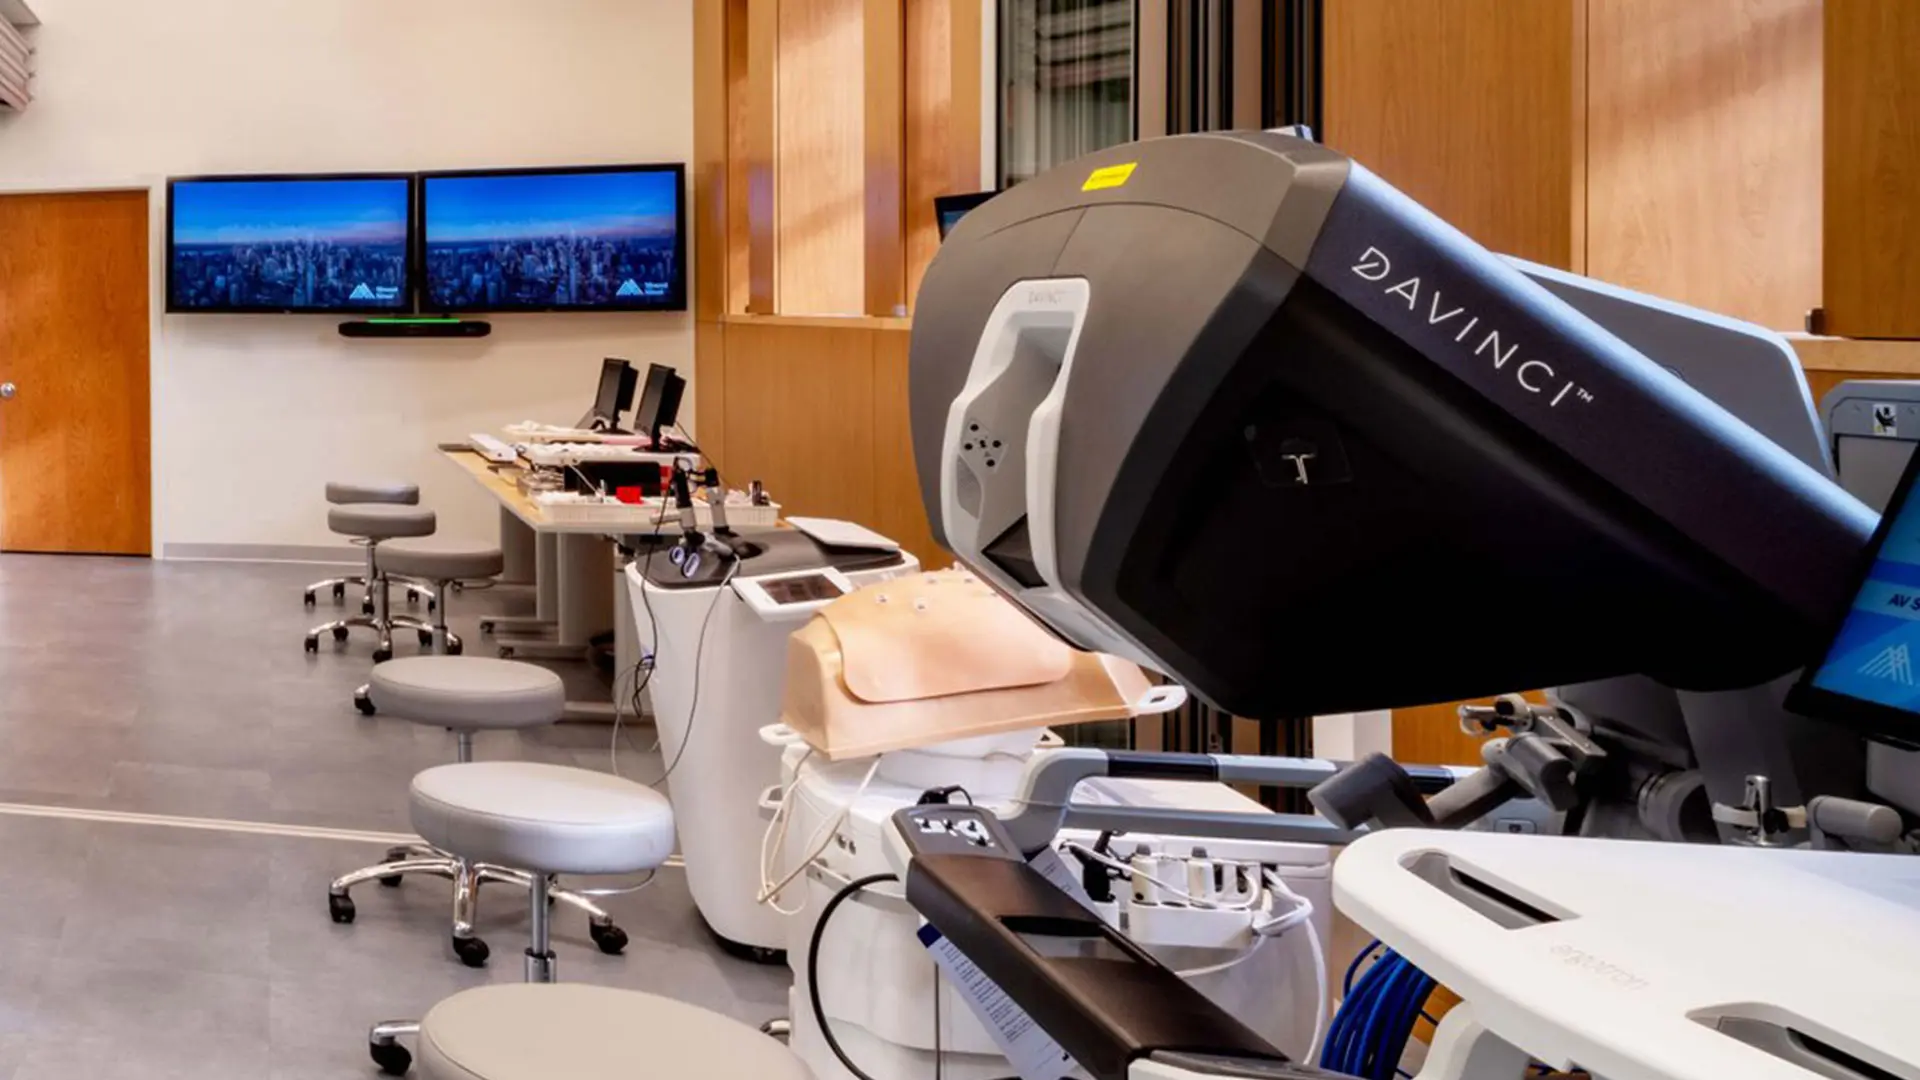 The Center is a state-of-the-art facility for the field of operating room and surgical simulation, shared among other Mount Sinai departments, including the Department of Surgery.